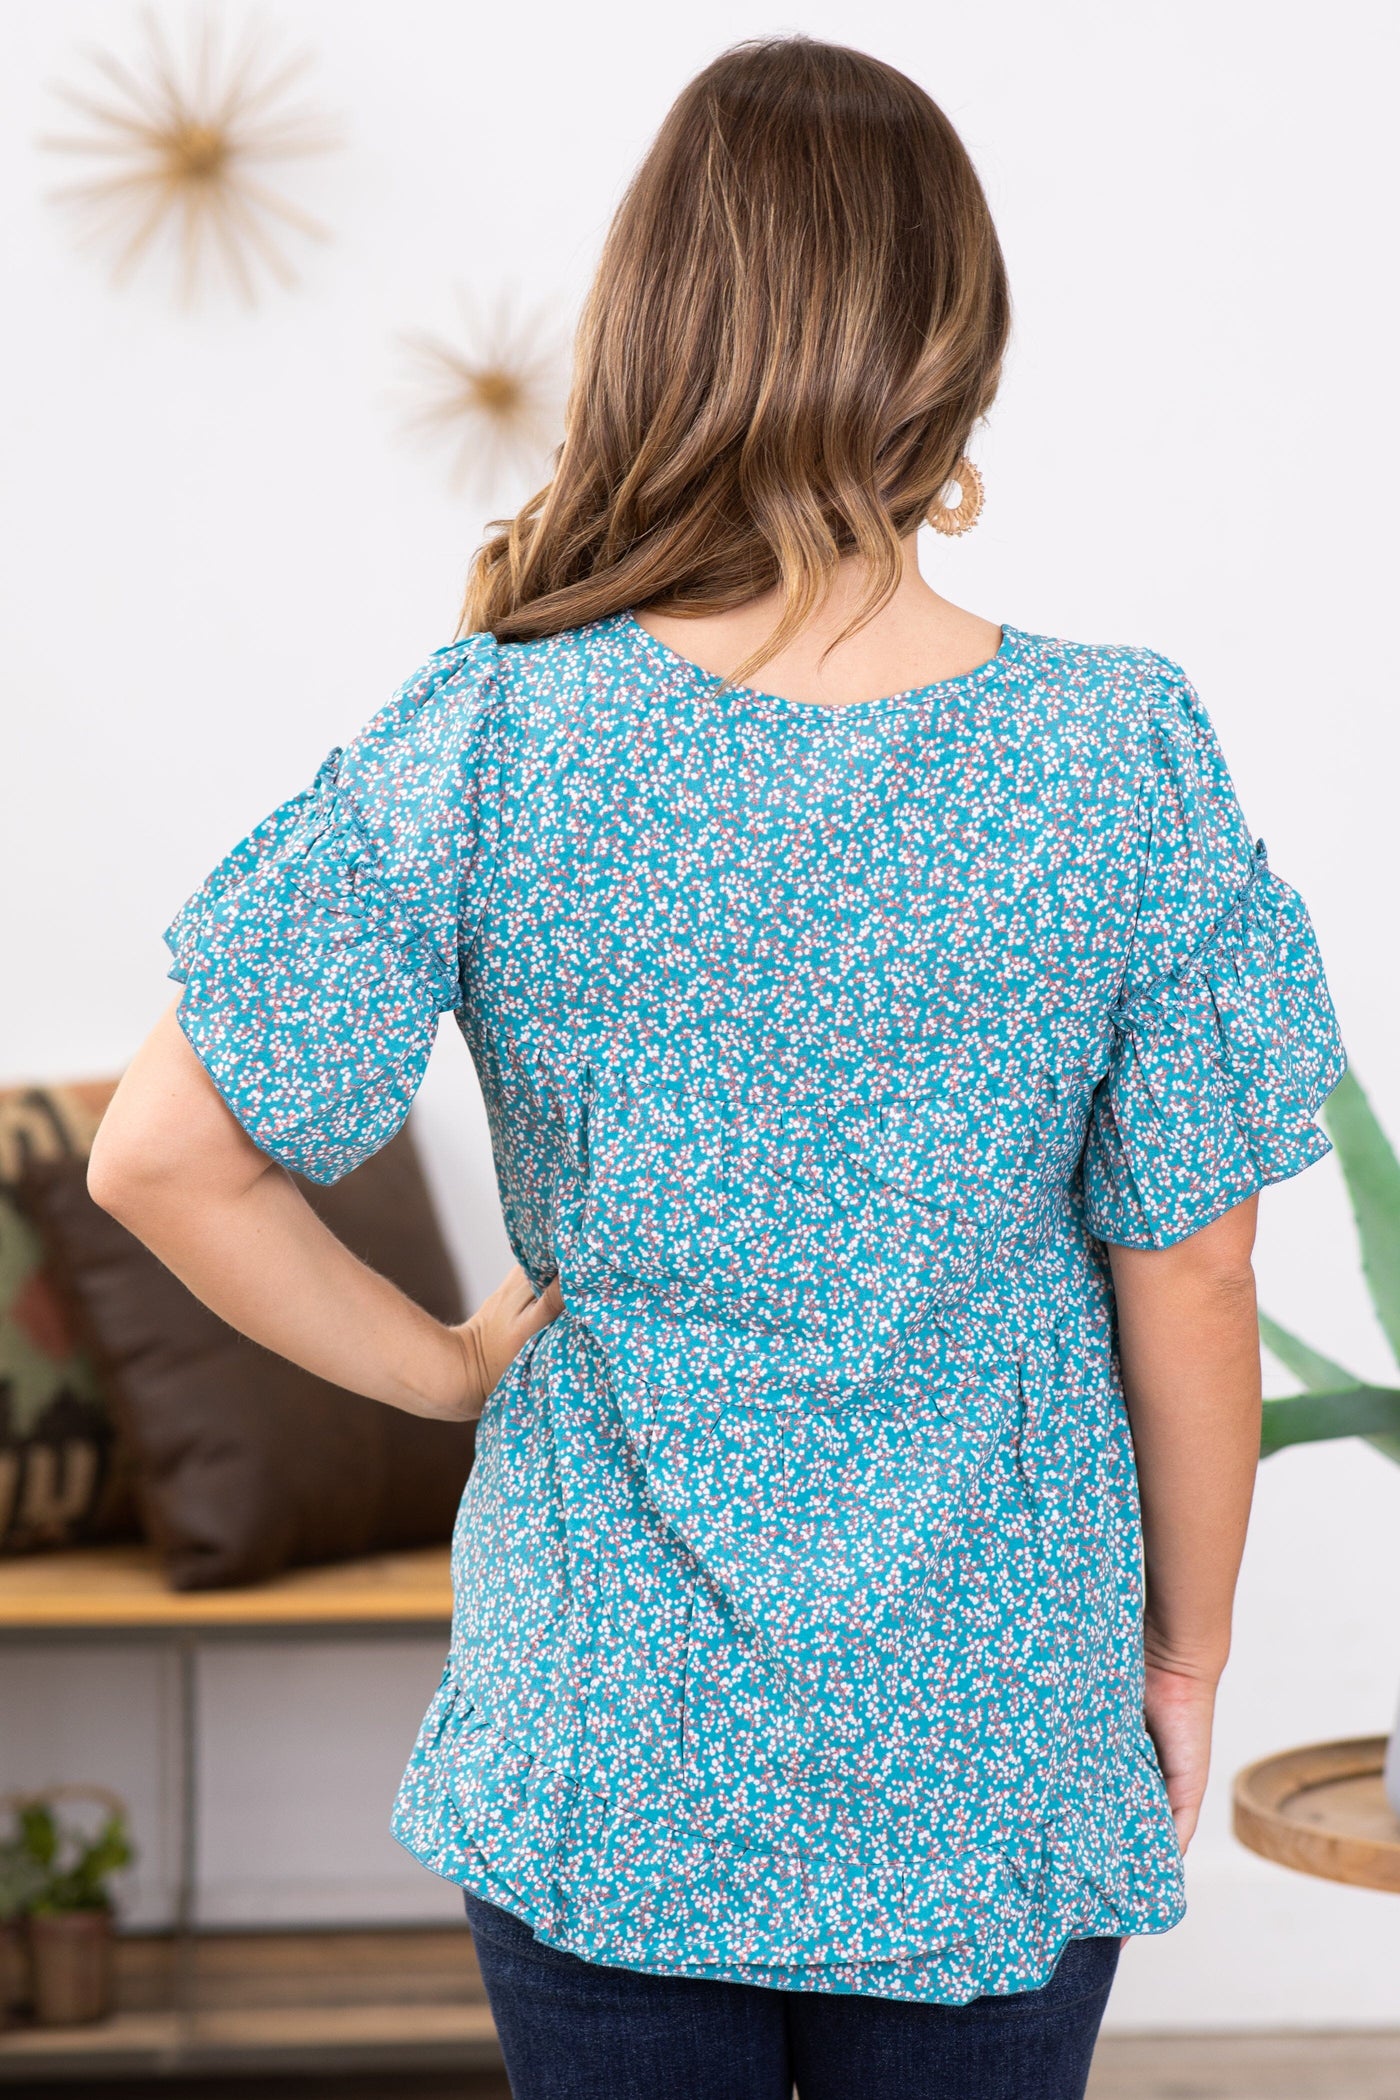 Teal and White Ditsy Floral Bell Sleeve Top - Filly Flair